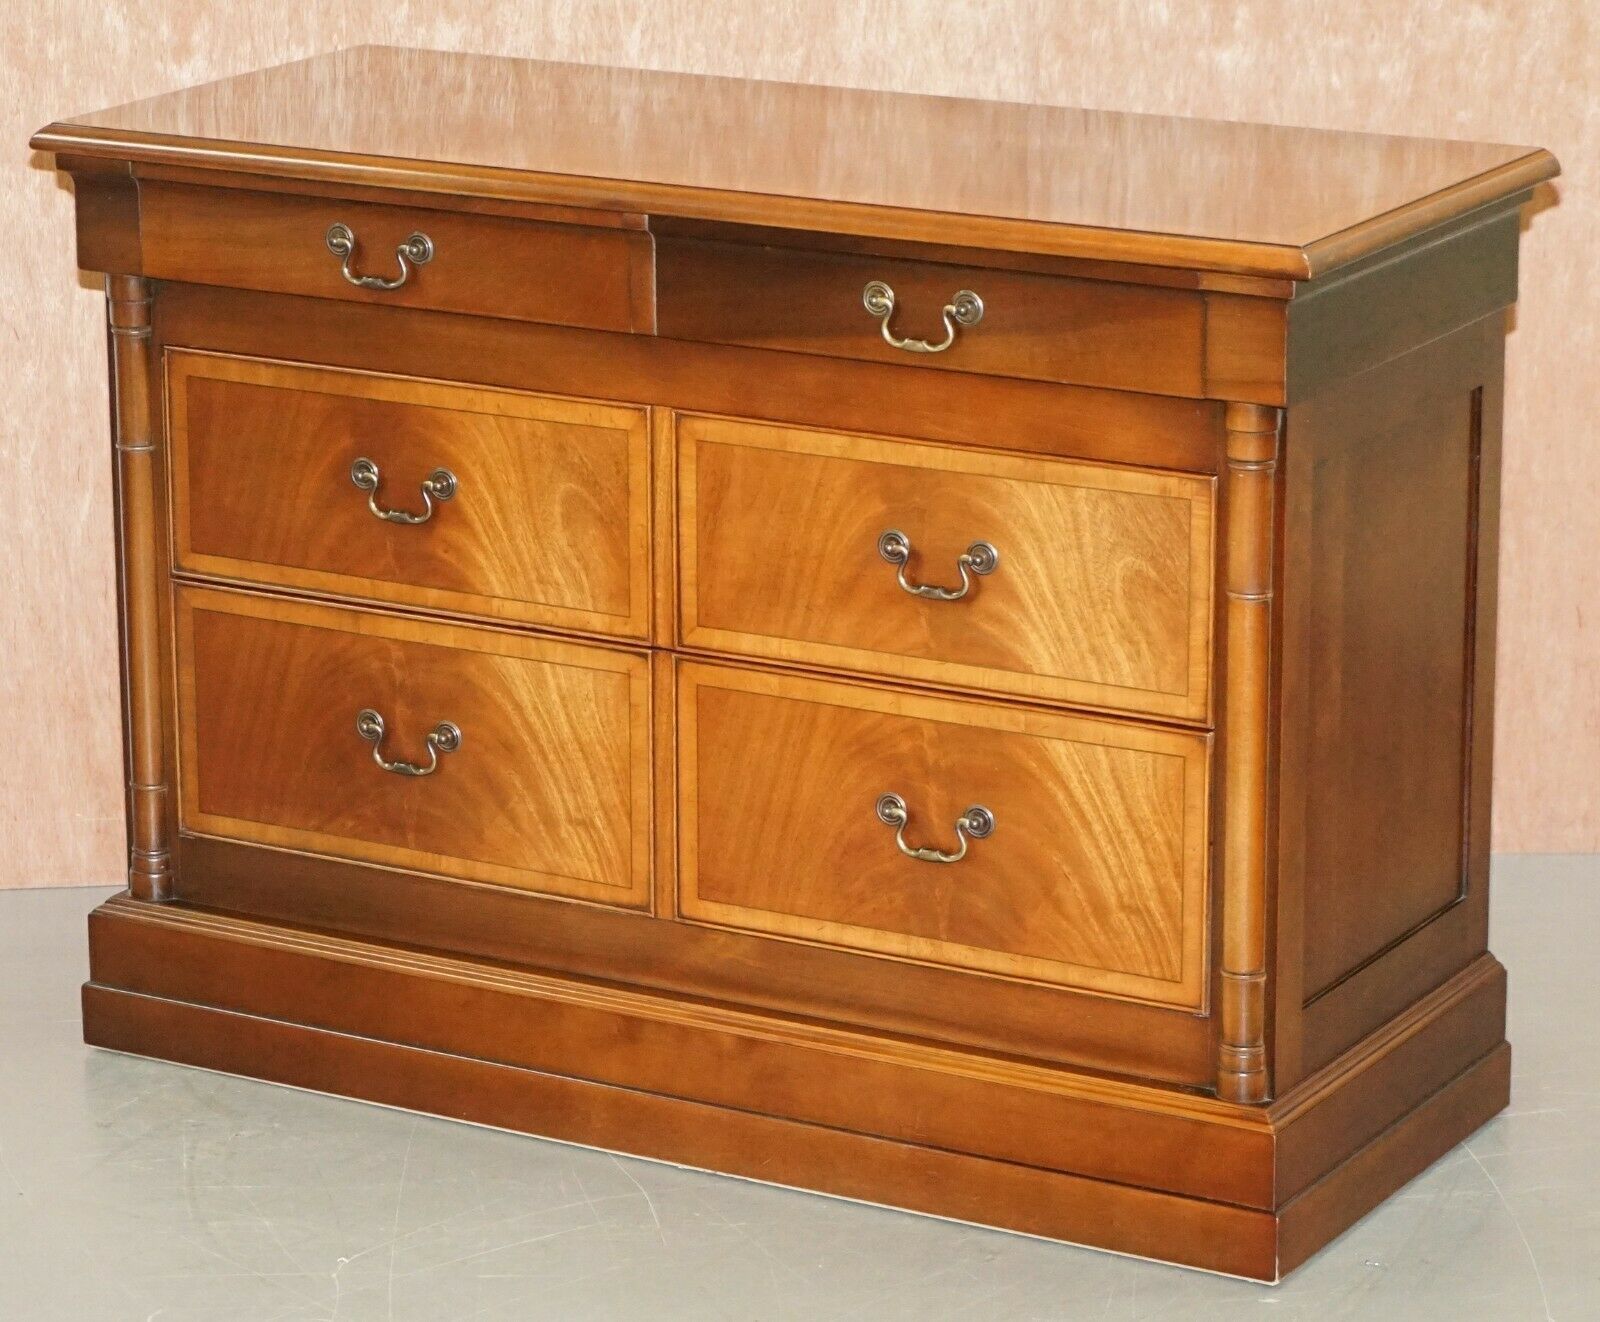 1 Of 2 Large Grange France Cherry Wood Sideboard Chest Of Regarding Wales Storage Sideboards (View 15 of 15)